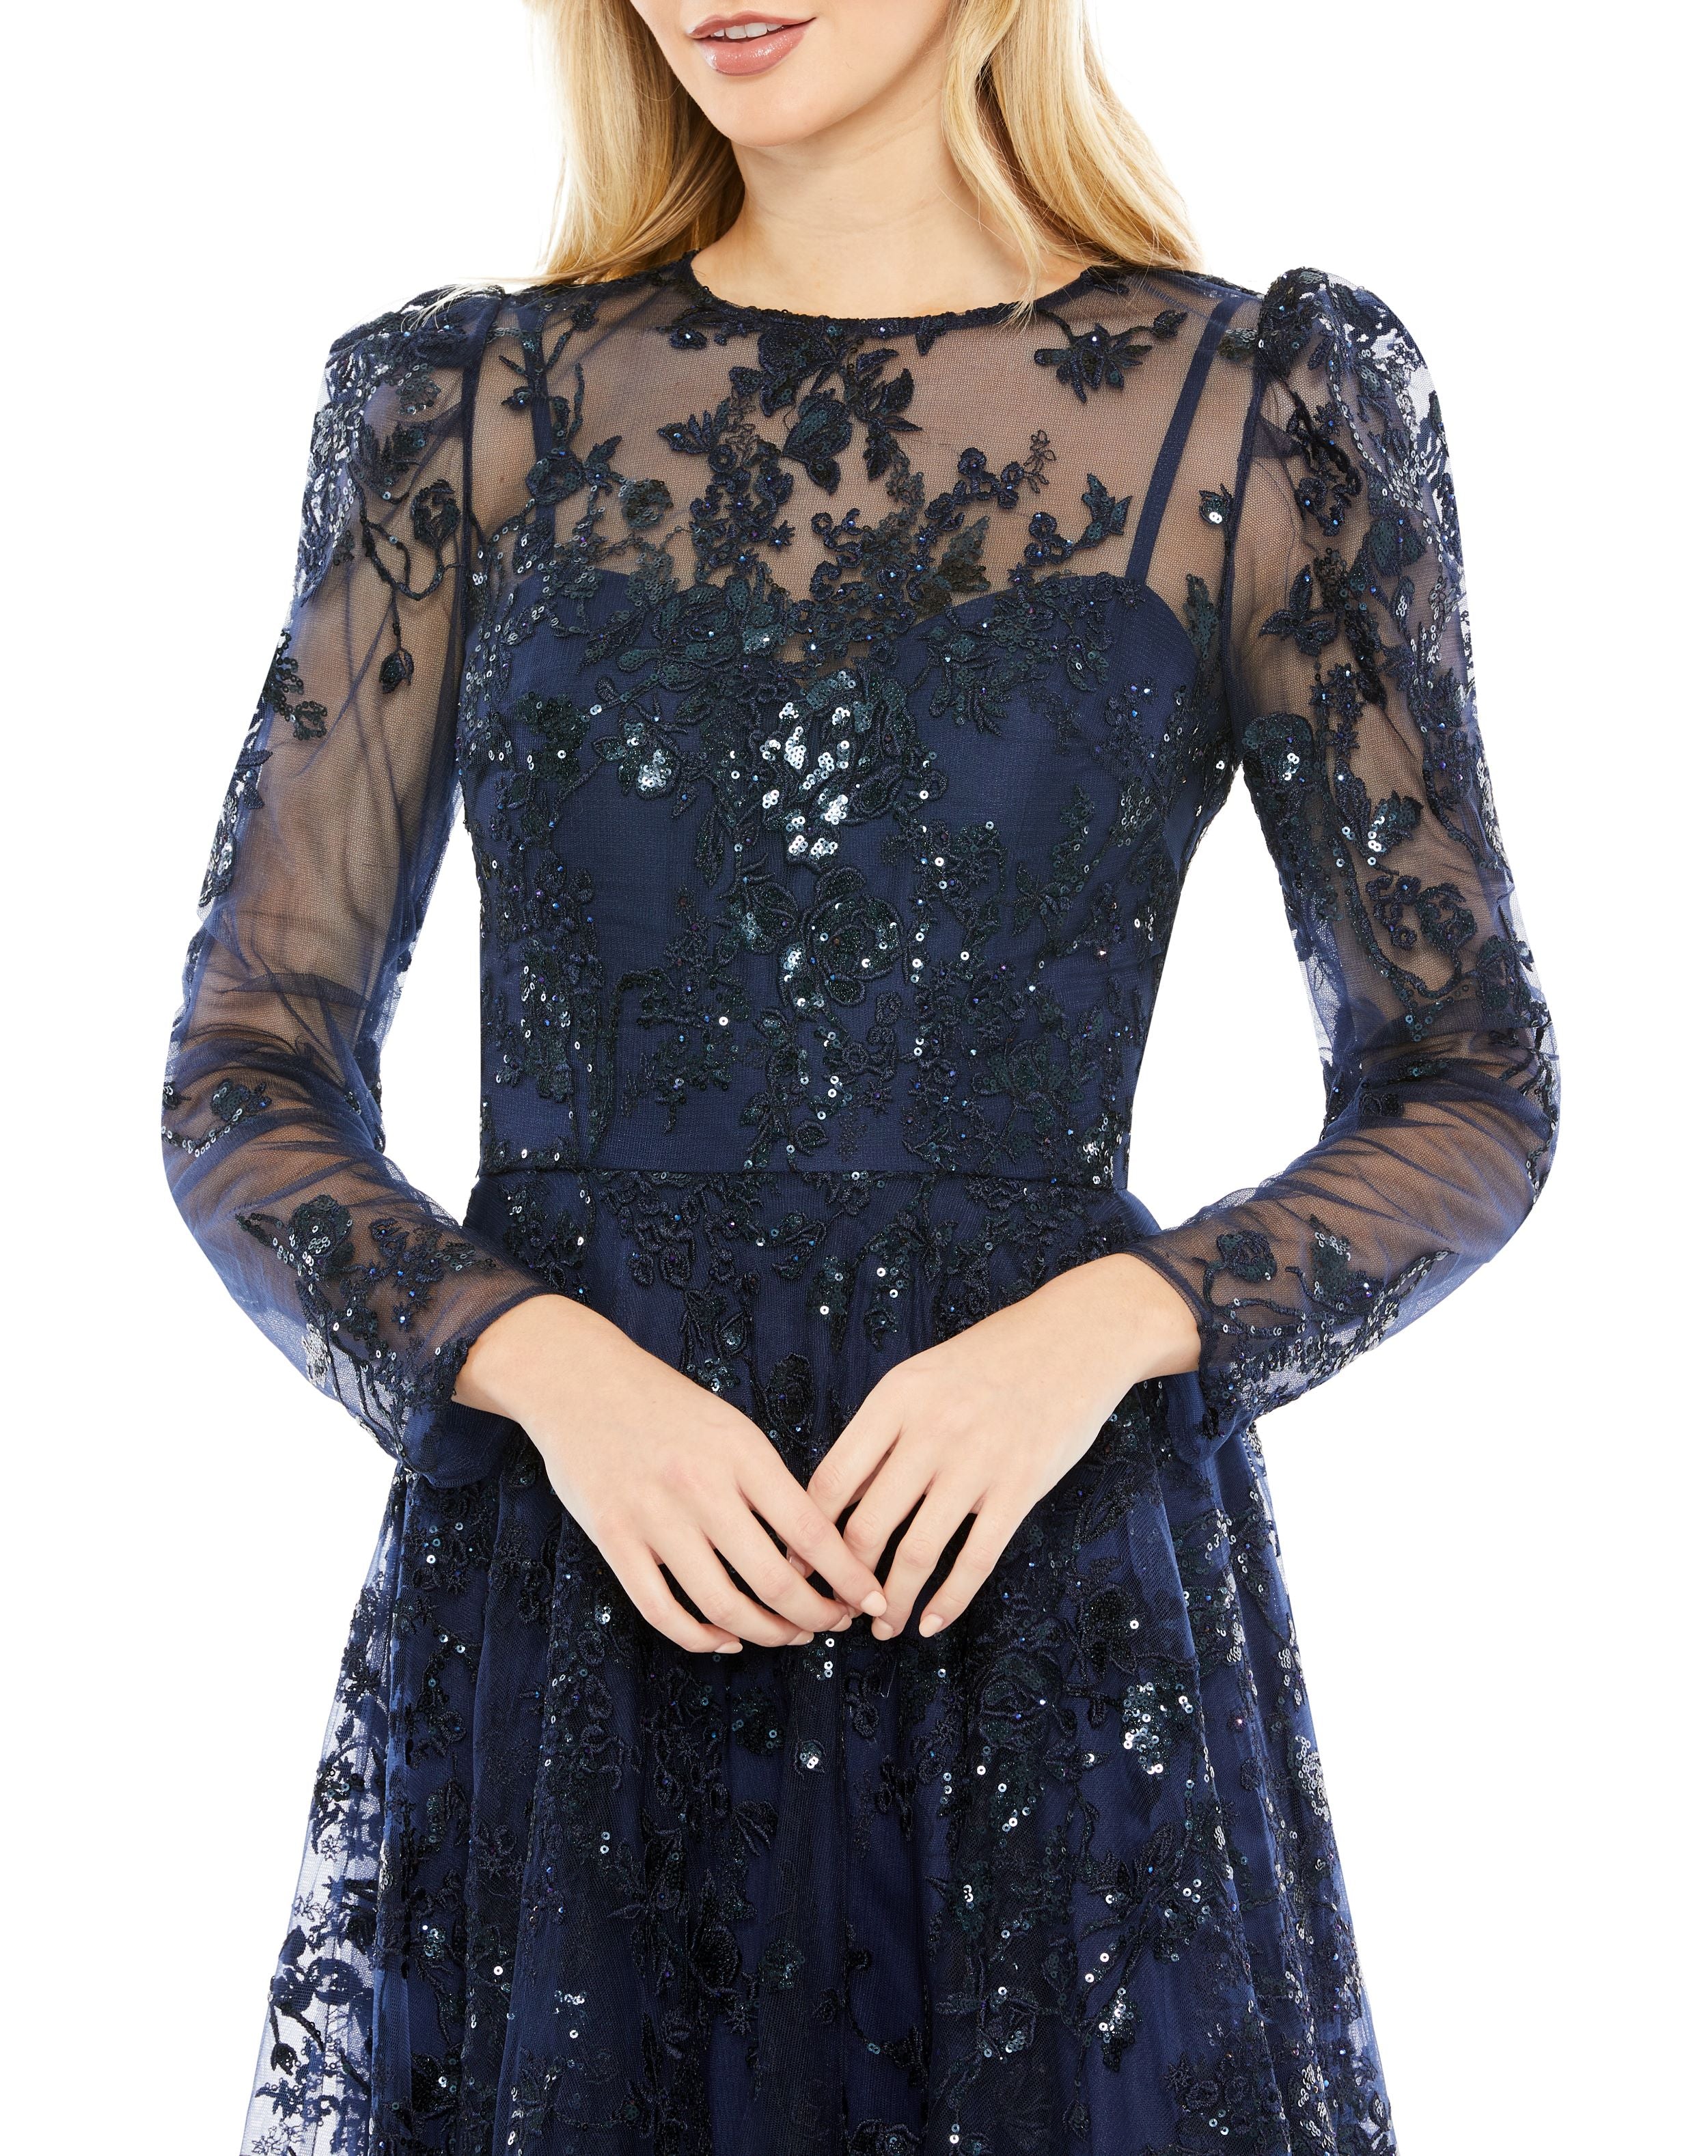 Embroidered Illusion High Neck A Line Dress